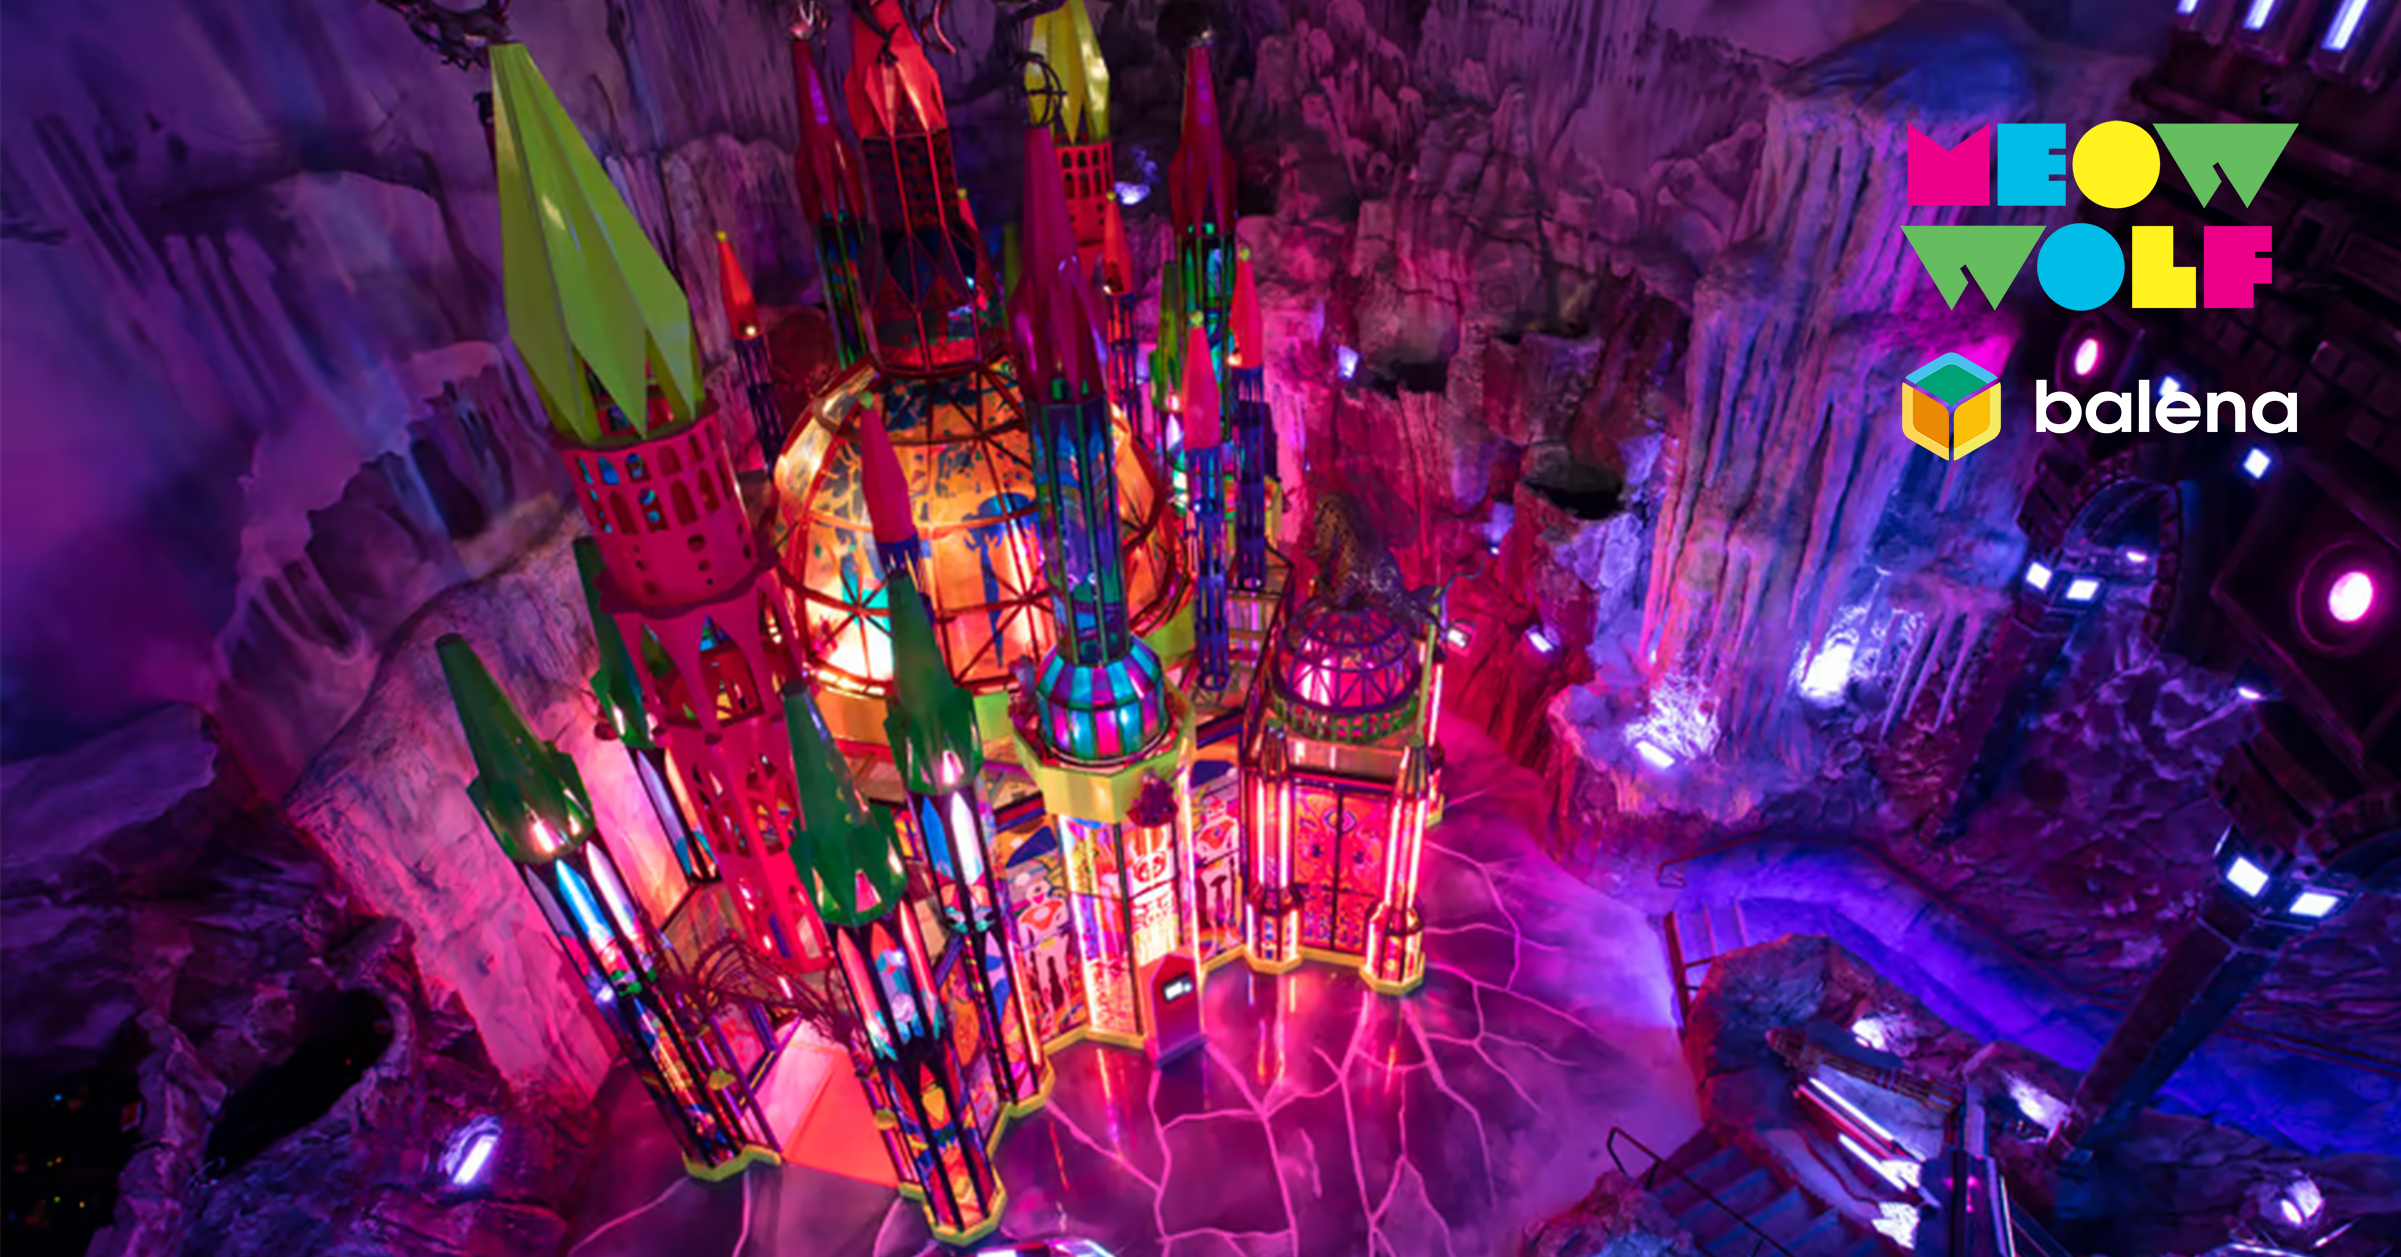 Meow wolf art installation using balena devices